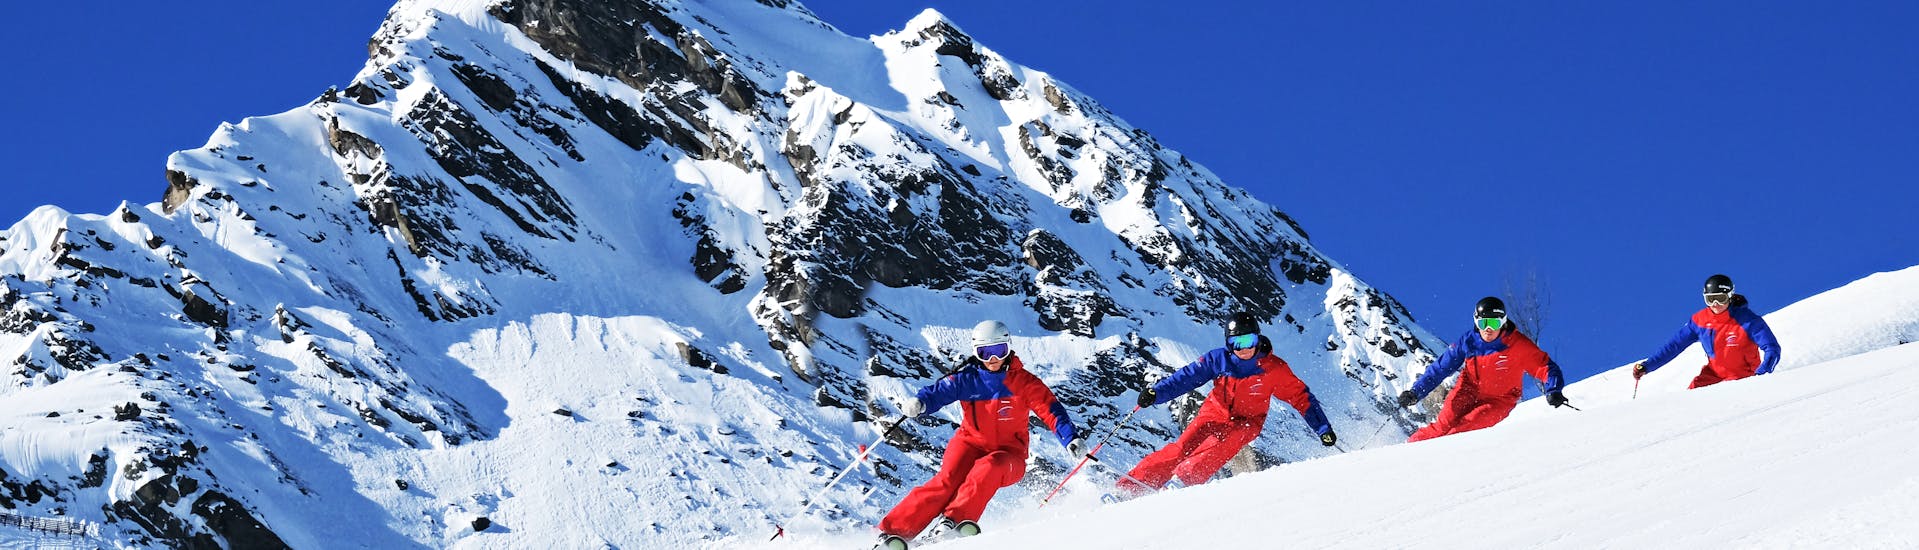 Adult Ski Lessons for Advanced Skiers with Skischule Silvretta Galtür - Hero image